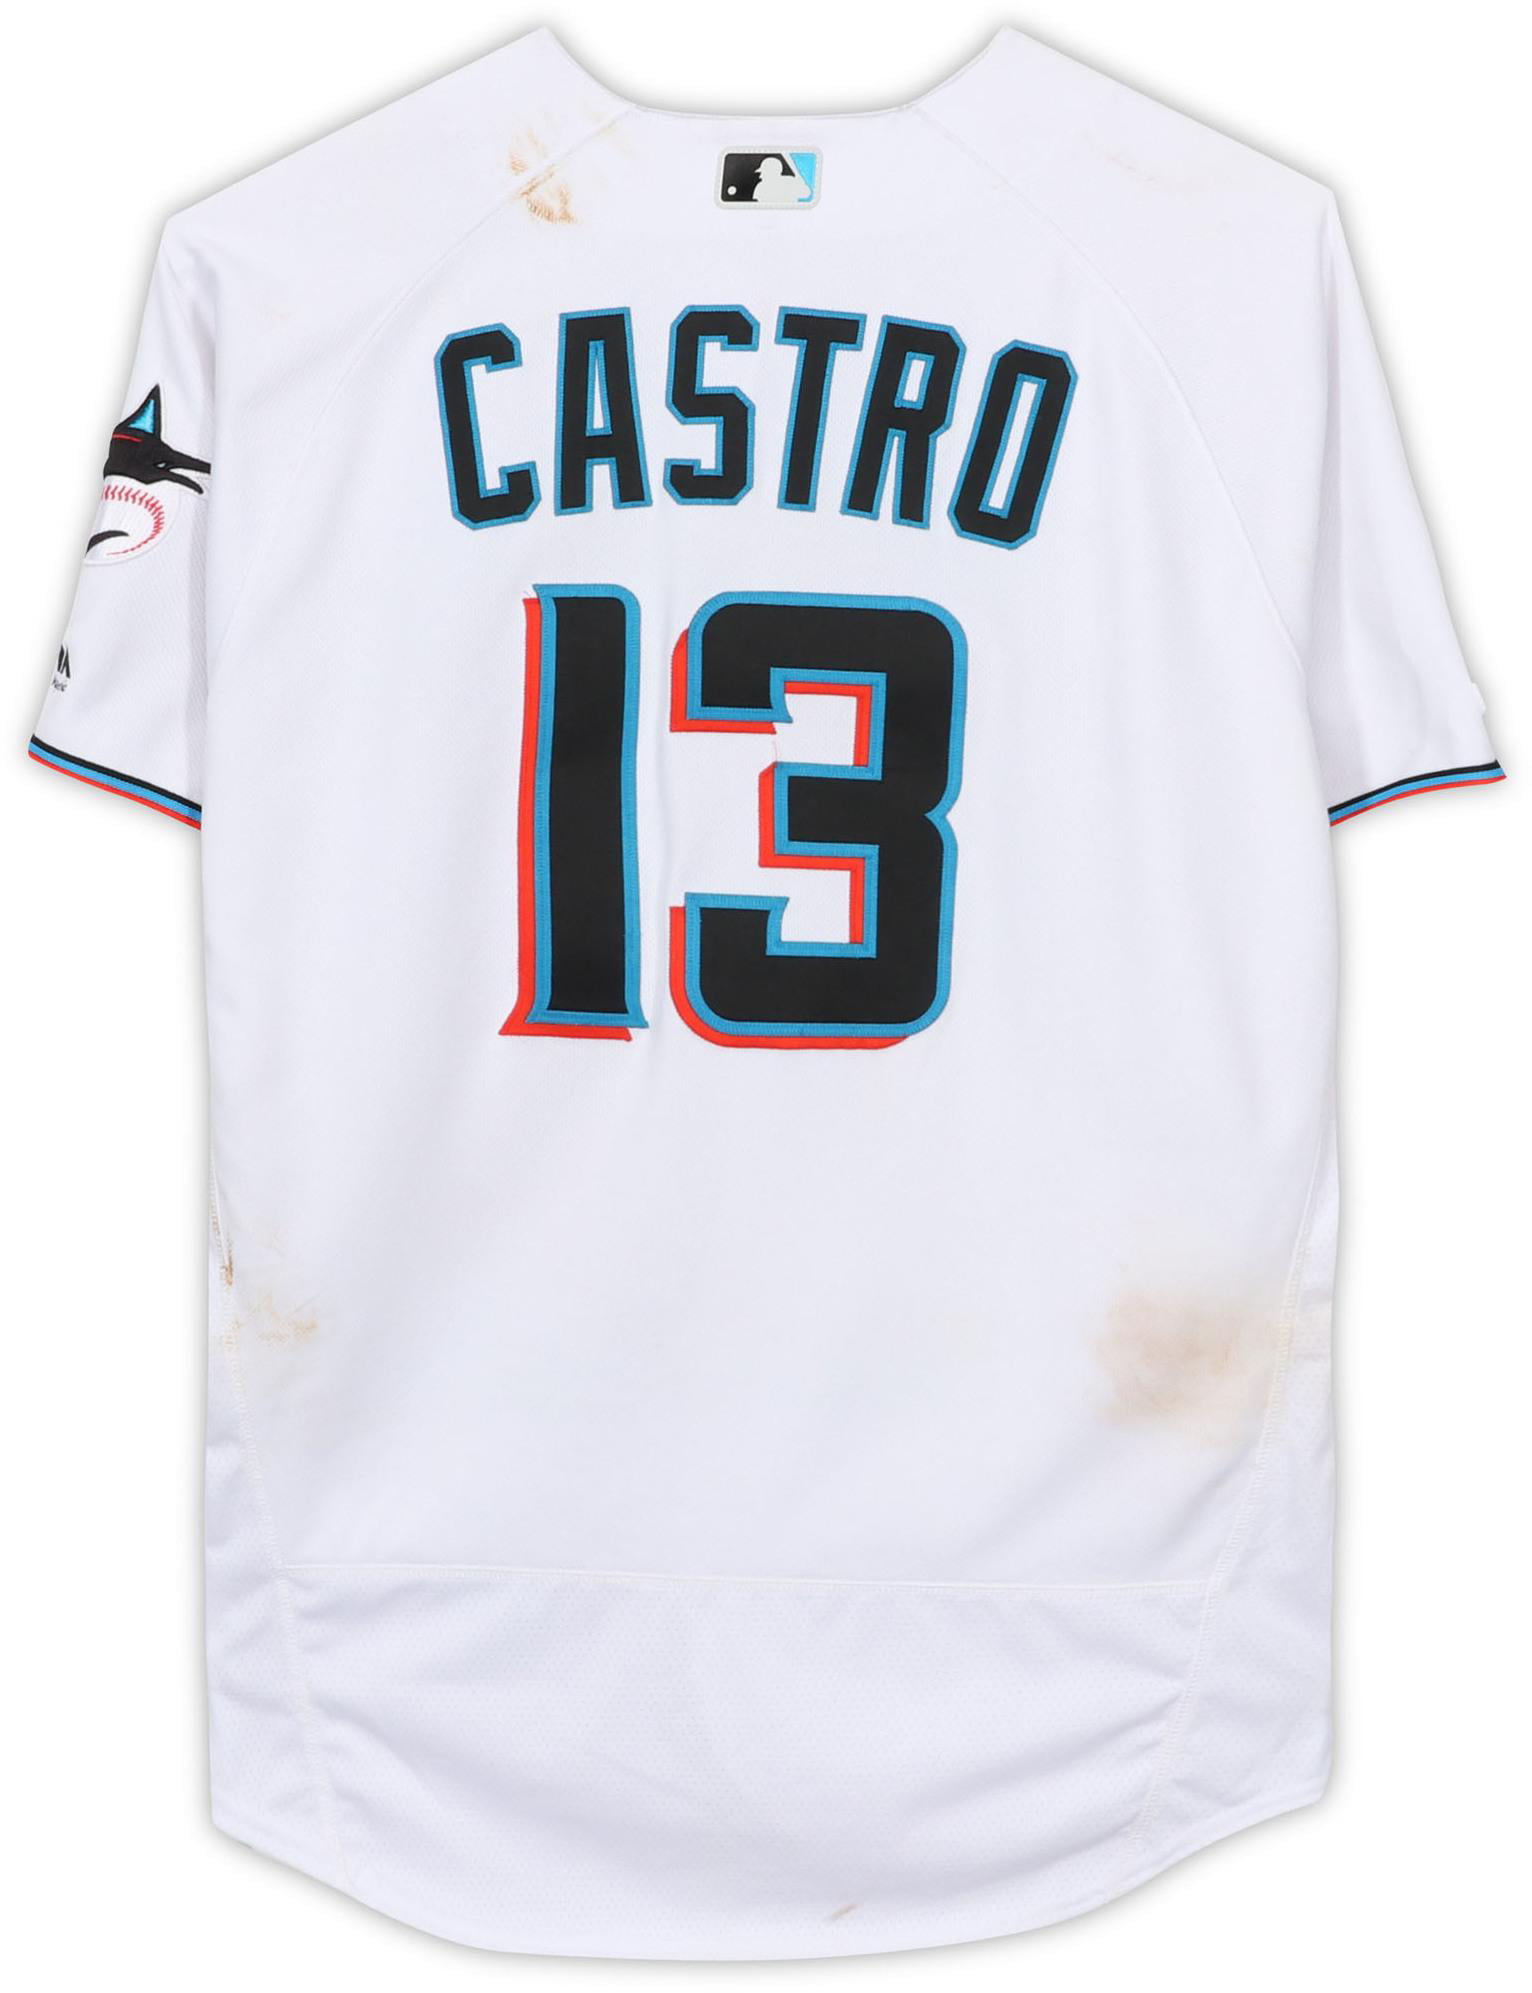 Starlin Castro Miami Marlins Game-Used #13 White Jersey vs. San Diego Padres on July 16, 2019 - 2-5, 3B, 3 RBI - Fanatics Authentic Certified - ...